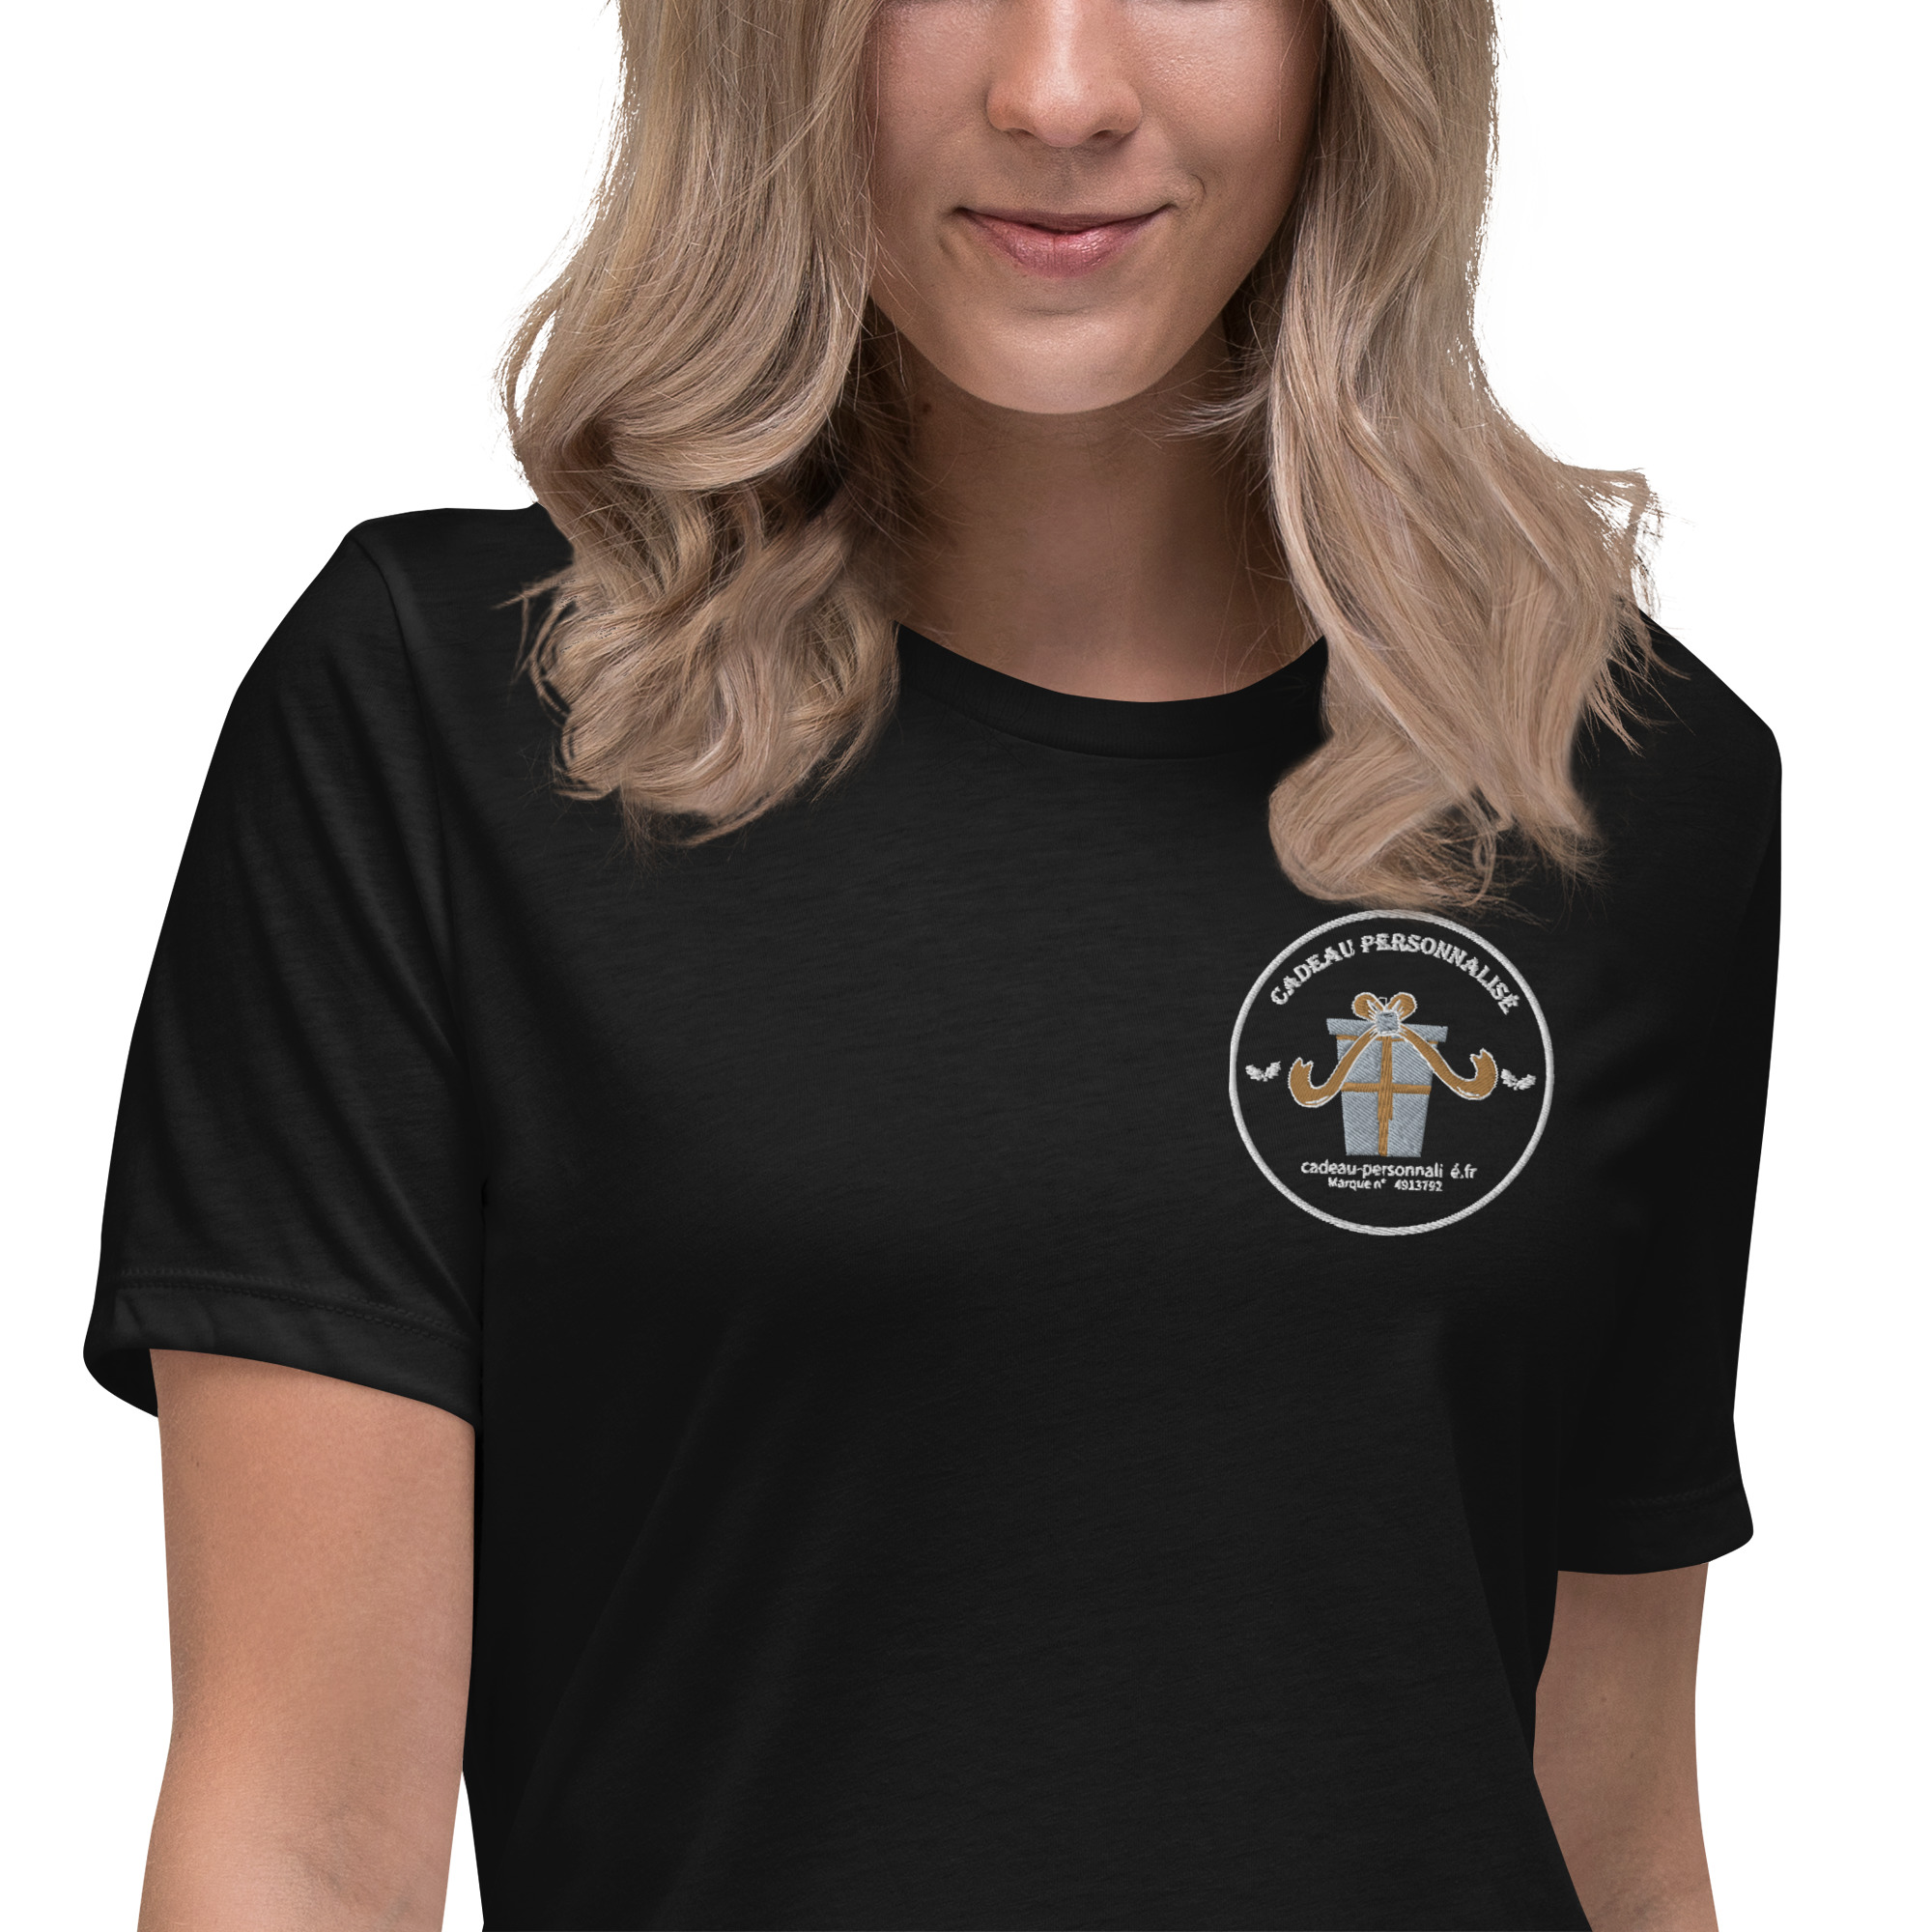 womens-relaxed-t-shirt-black-zoomed-in-646916beafef5.jpg